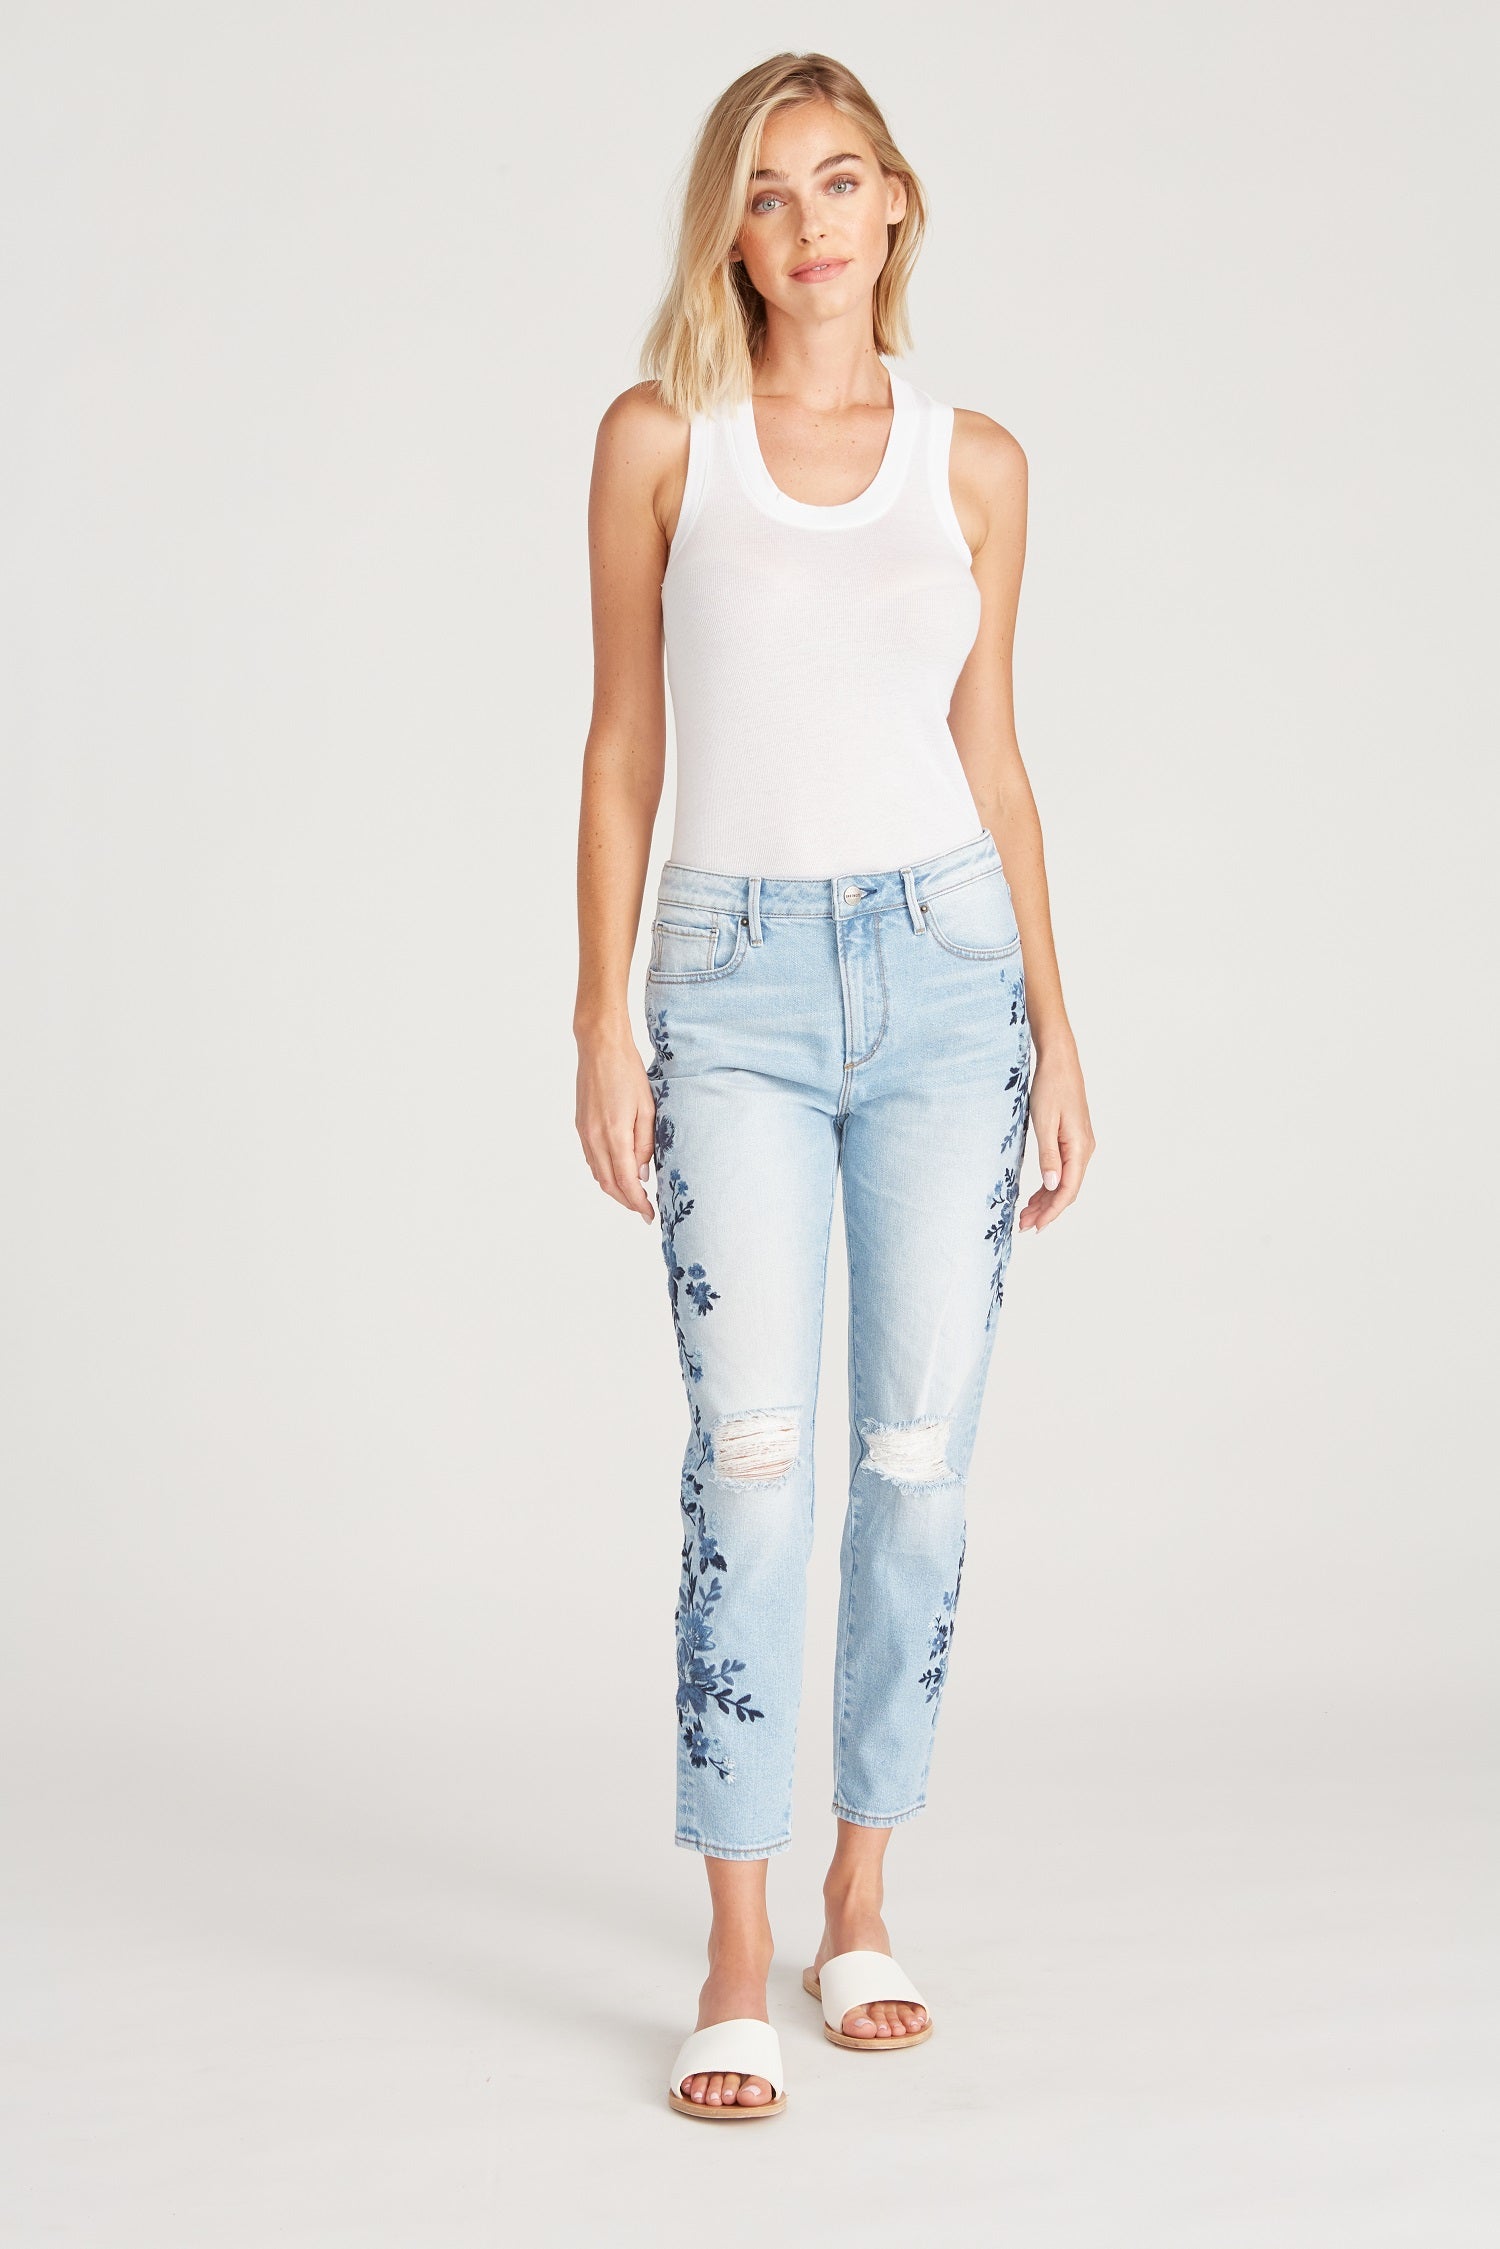 Gizelle Girlfriend Skinny - South Pacific – Driftwood Jeans